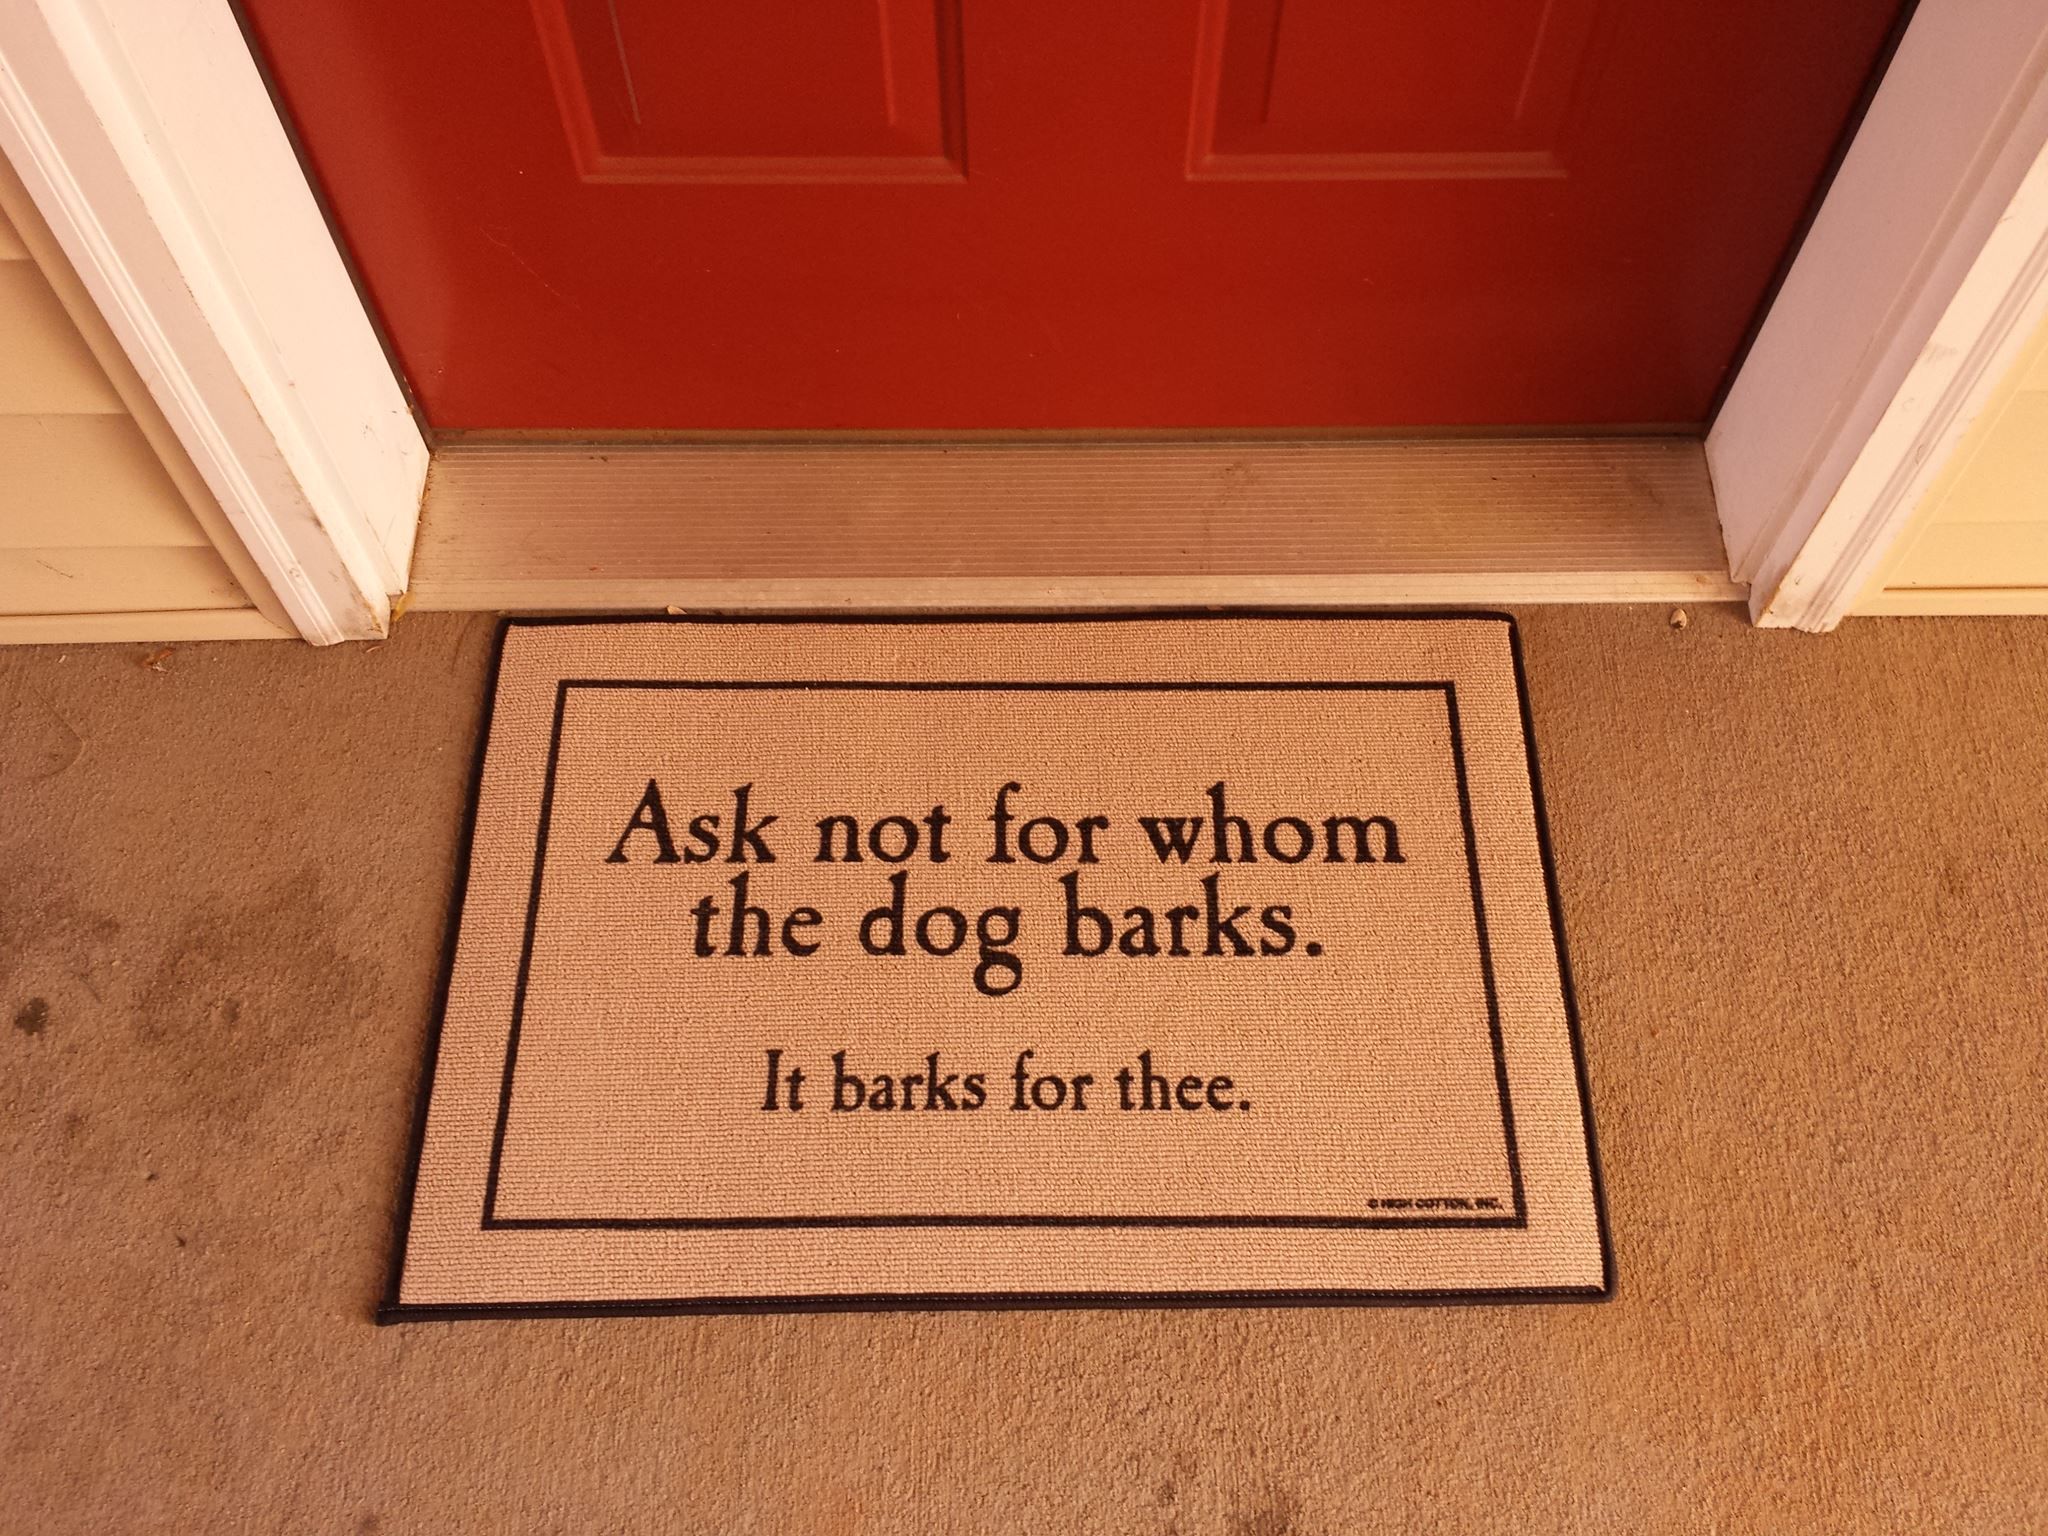 Shameless repost of my doormat, which is a constant source of amusement for pizza delivery guys/gals.